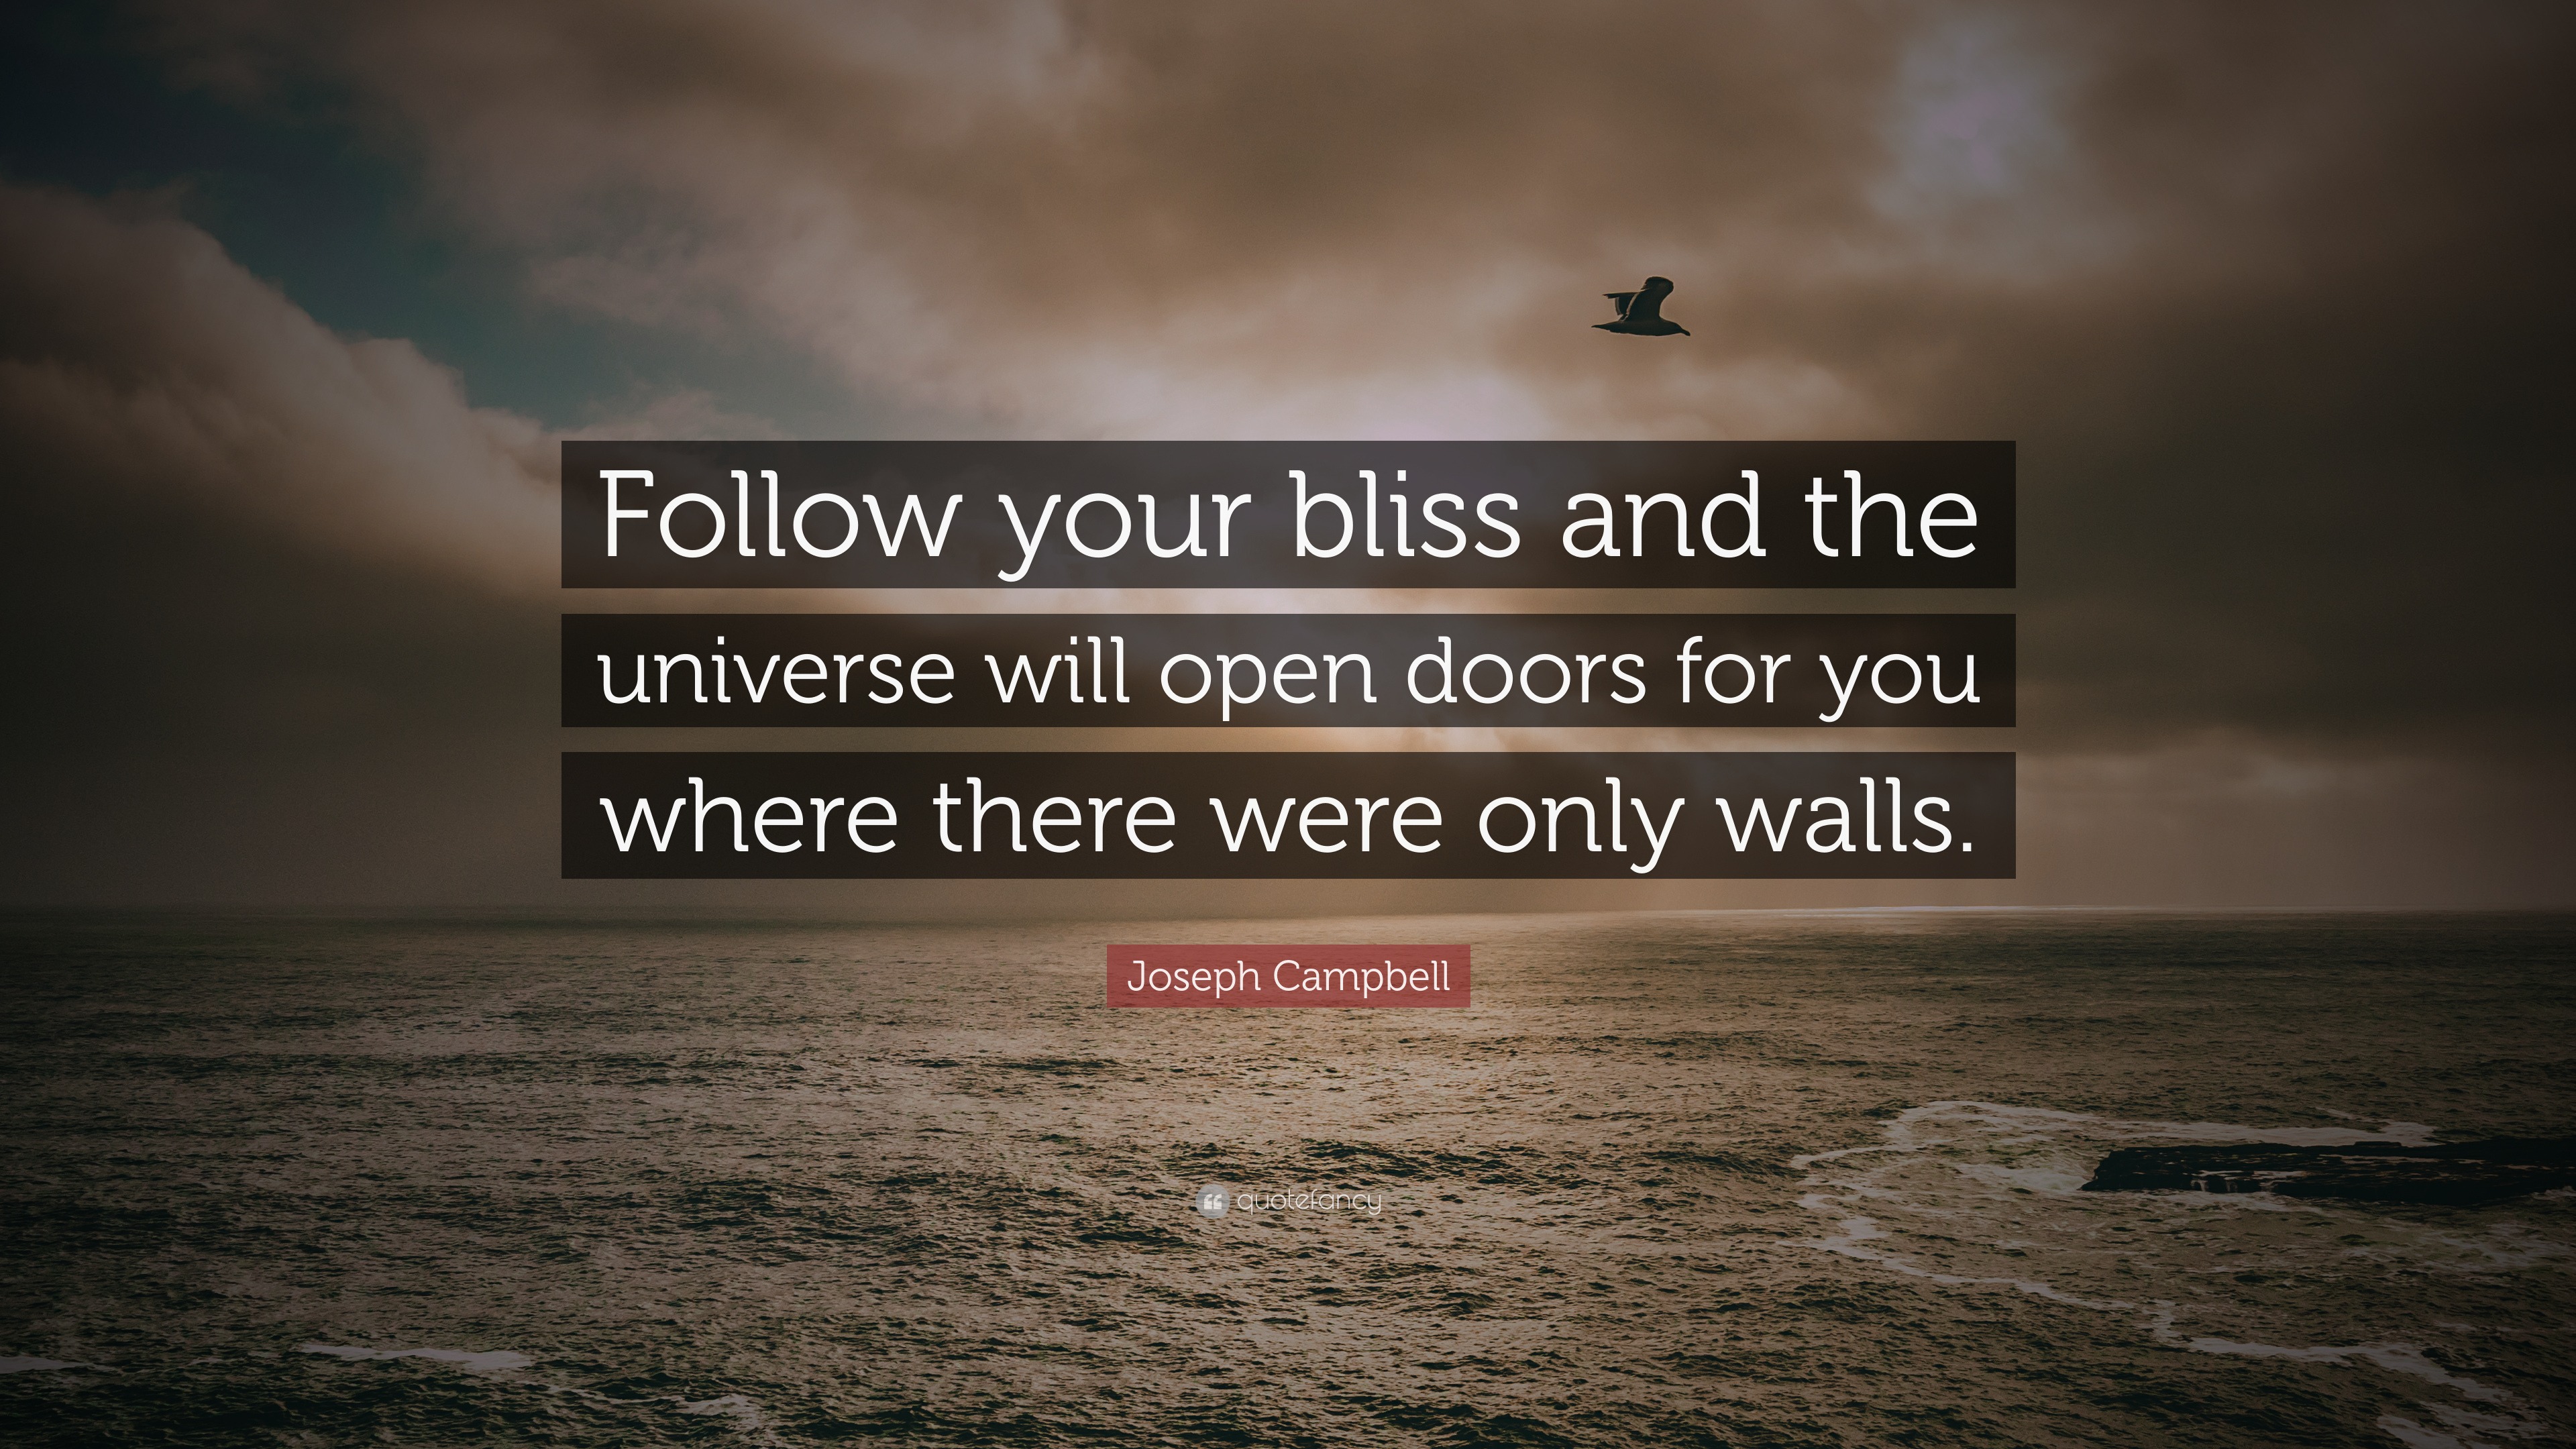 4677898 Joseph Campbell Quote Follow your bliss and the universe will open